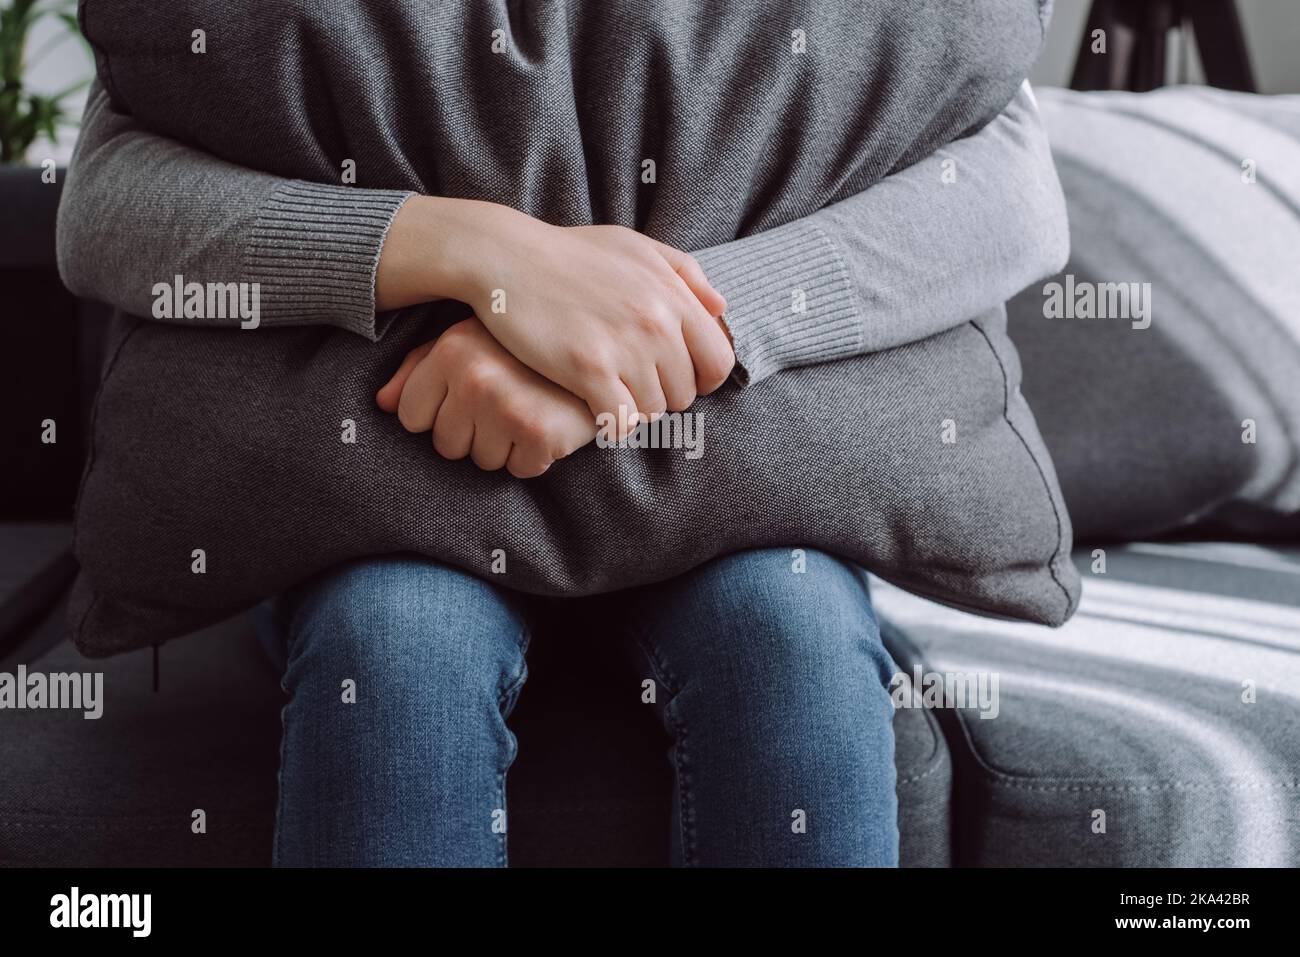 Unhappy lonely depressed young woman at home sitting on couch hiding her face big grey pillow, crying feeling stressed, mourning, suffering from negat Stock Photo